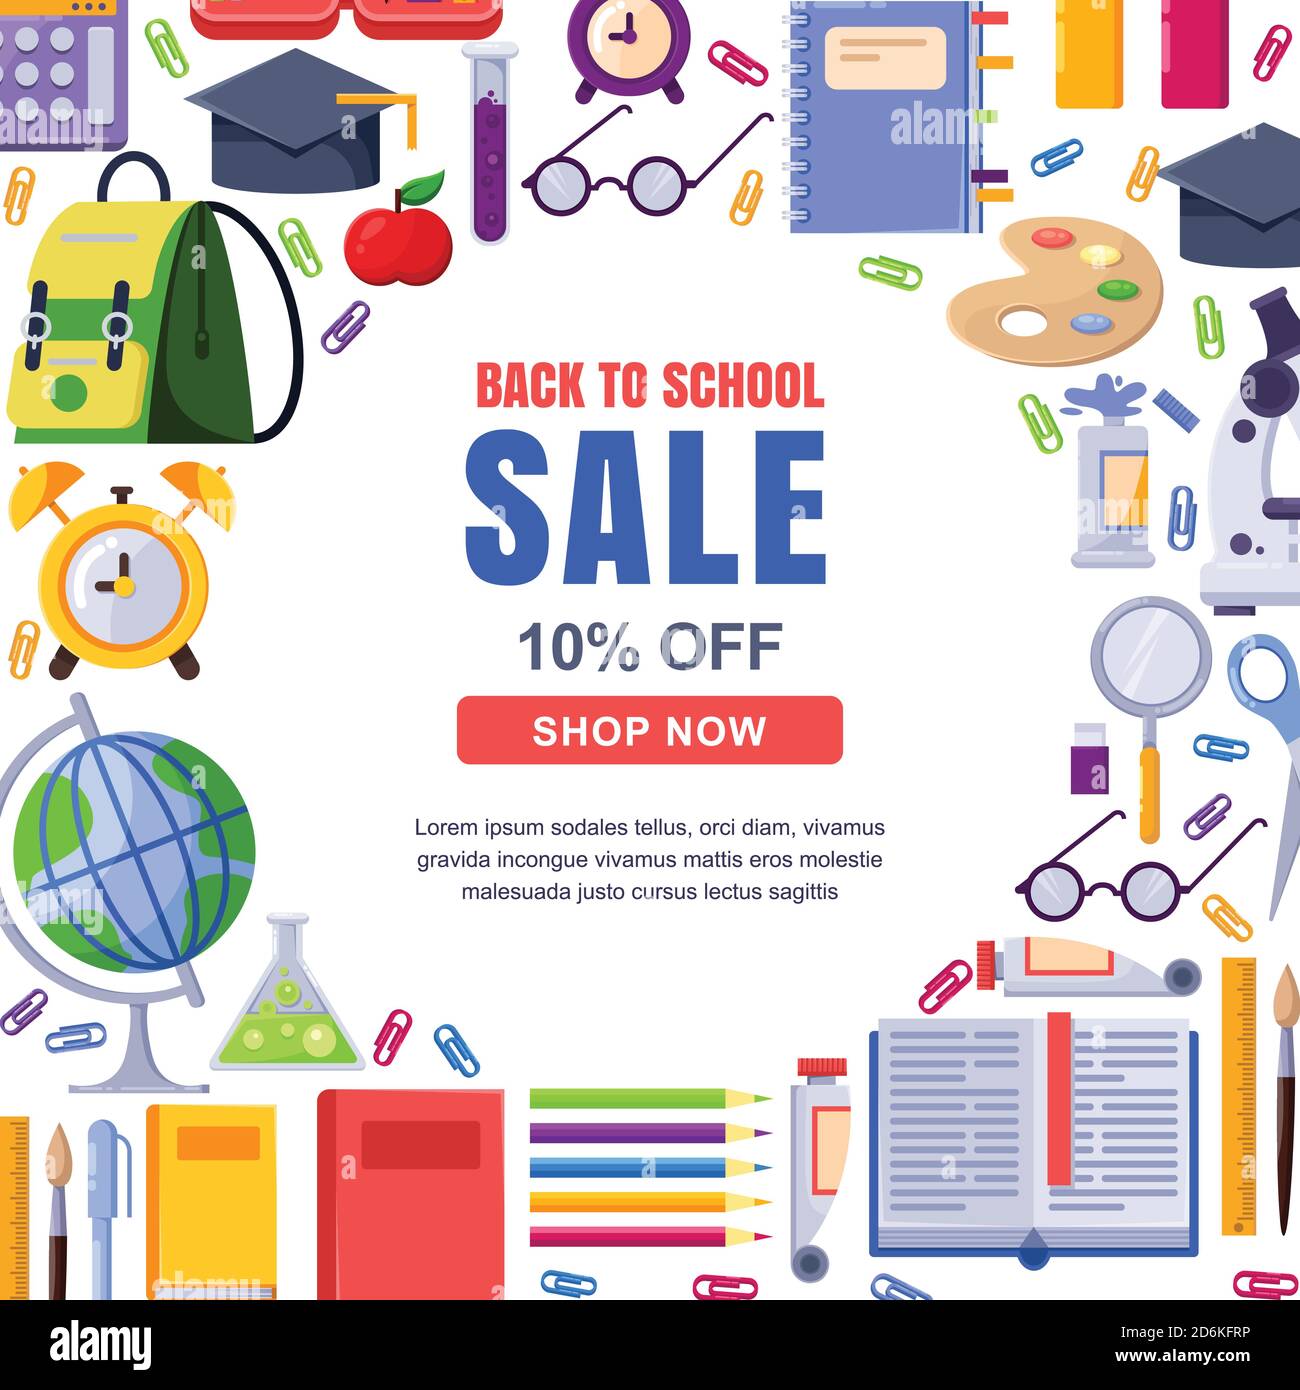 https://c8.alamy.com/comp/2D6KFRP/back-to-school-sale-vector-banner-poster-template-education-white-frame-background-with-stationery-supplies-2D6KFRP.jpg